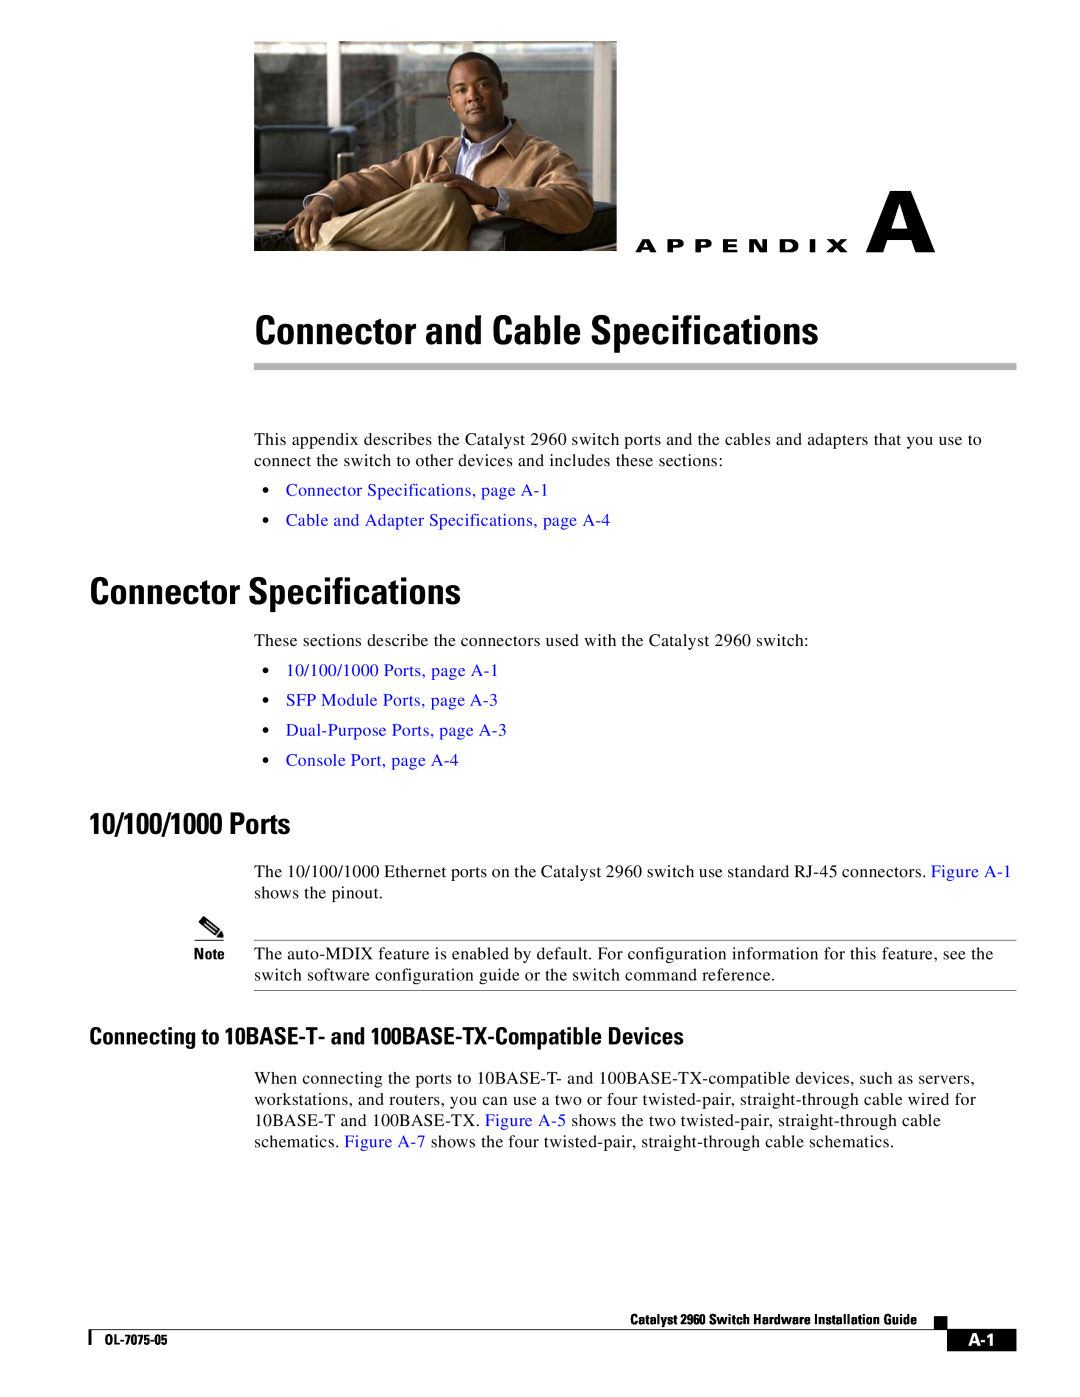 Cisco Systems 2960 Connector and Cable Specifications, Connector Specifications, A P P E N D I X A, 10/100/1000 Ports 